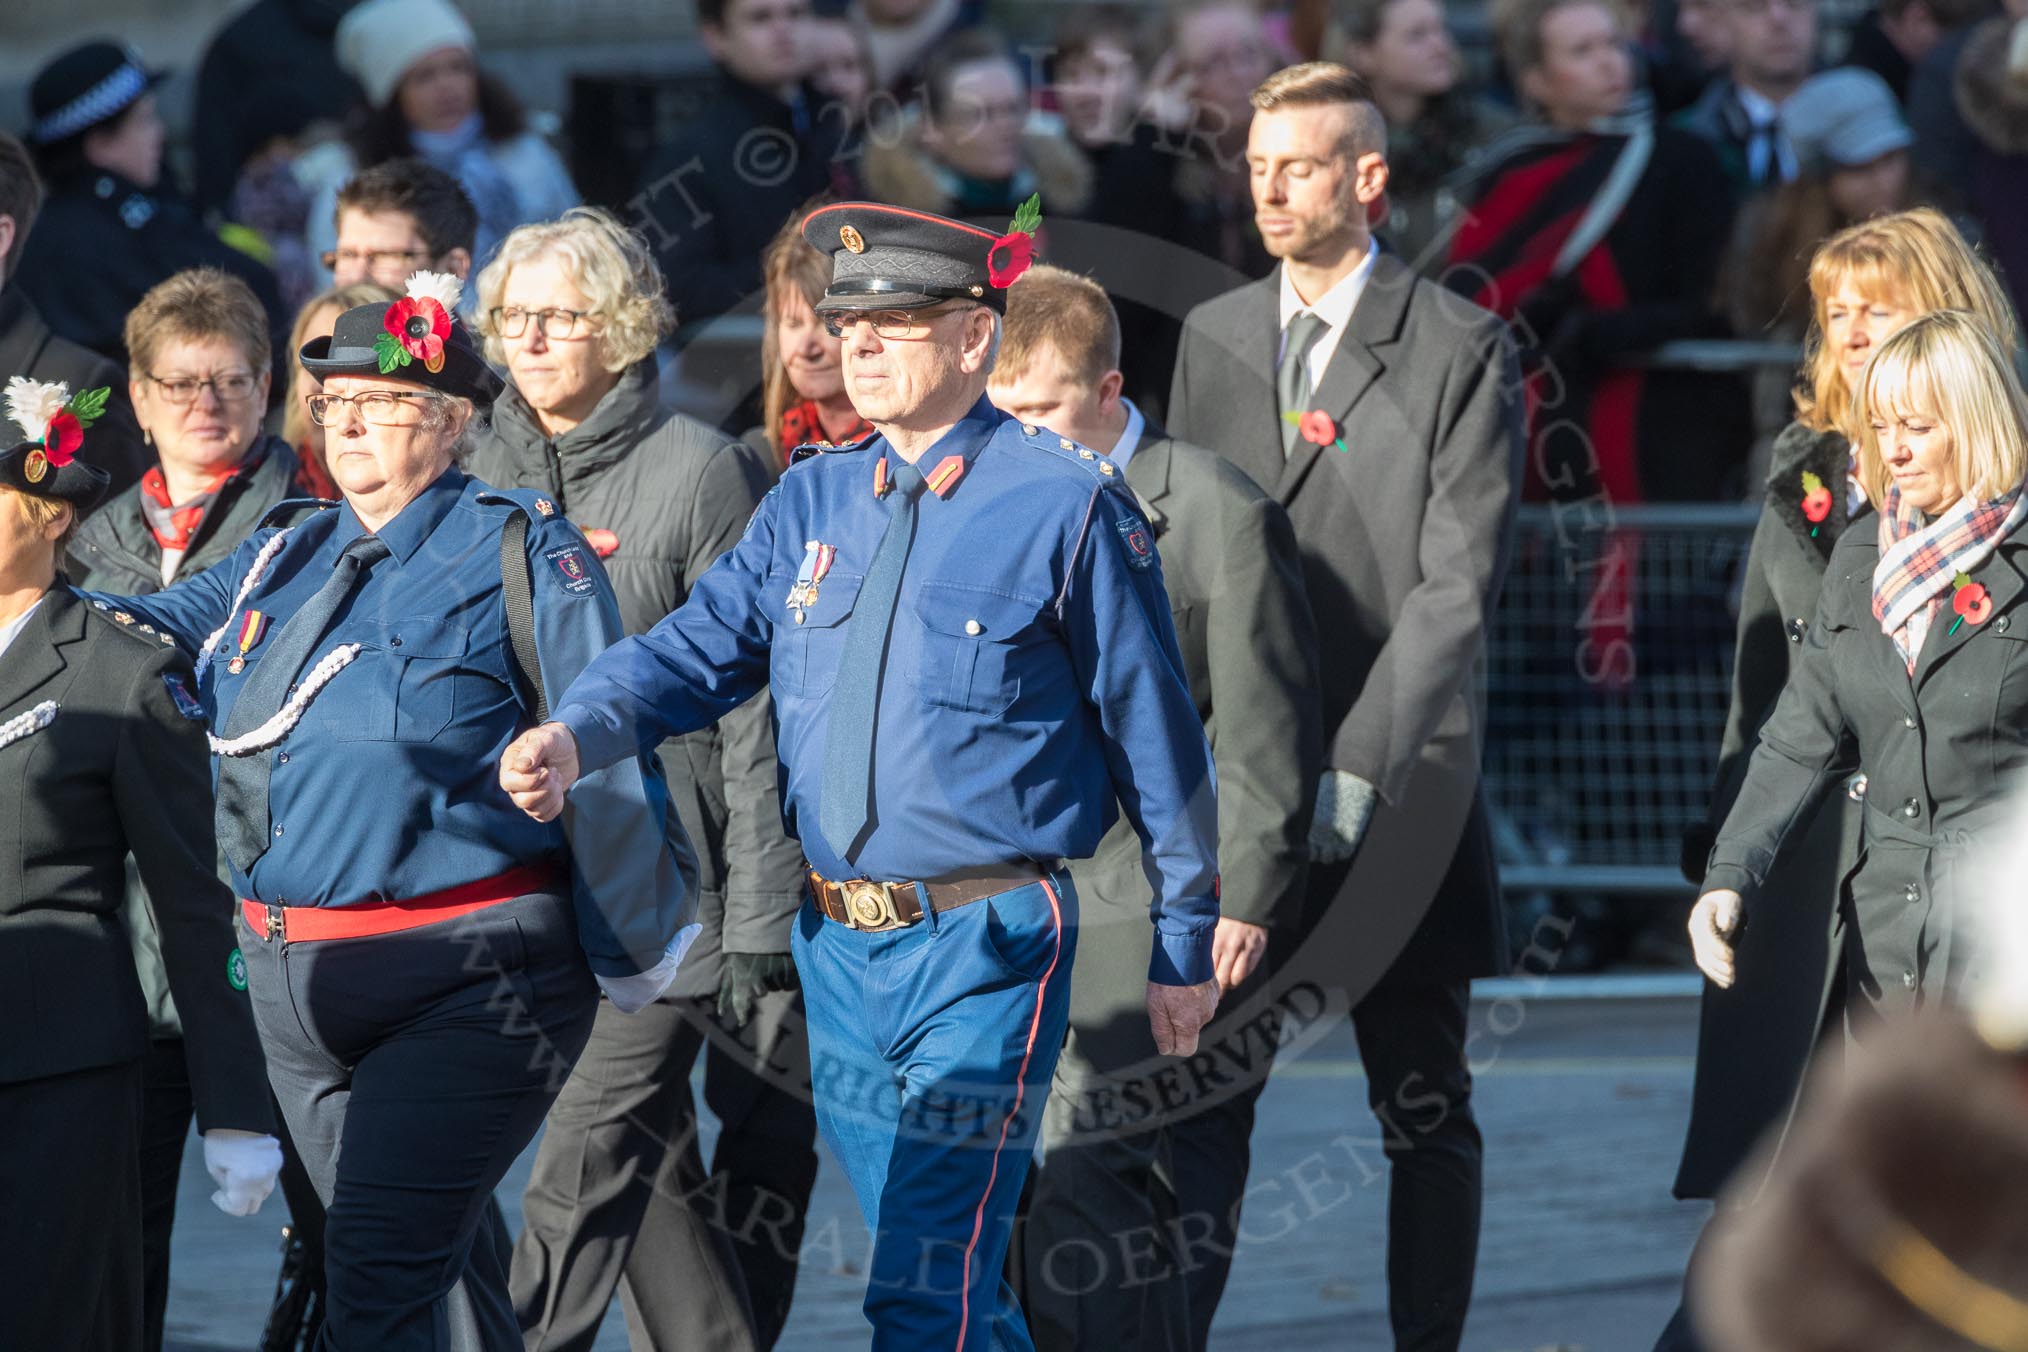 March Past, Remembrance Sunday at the Cenotaph 2016: M37 YMCA.
Cenotaph, Whitehall, London SW1,
London,
Greater London,
United Kingdom,
on 13 November 2016 at 13:19, image #2905